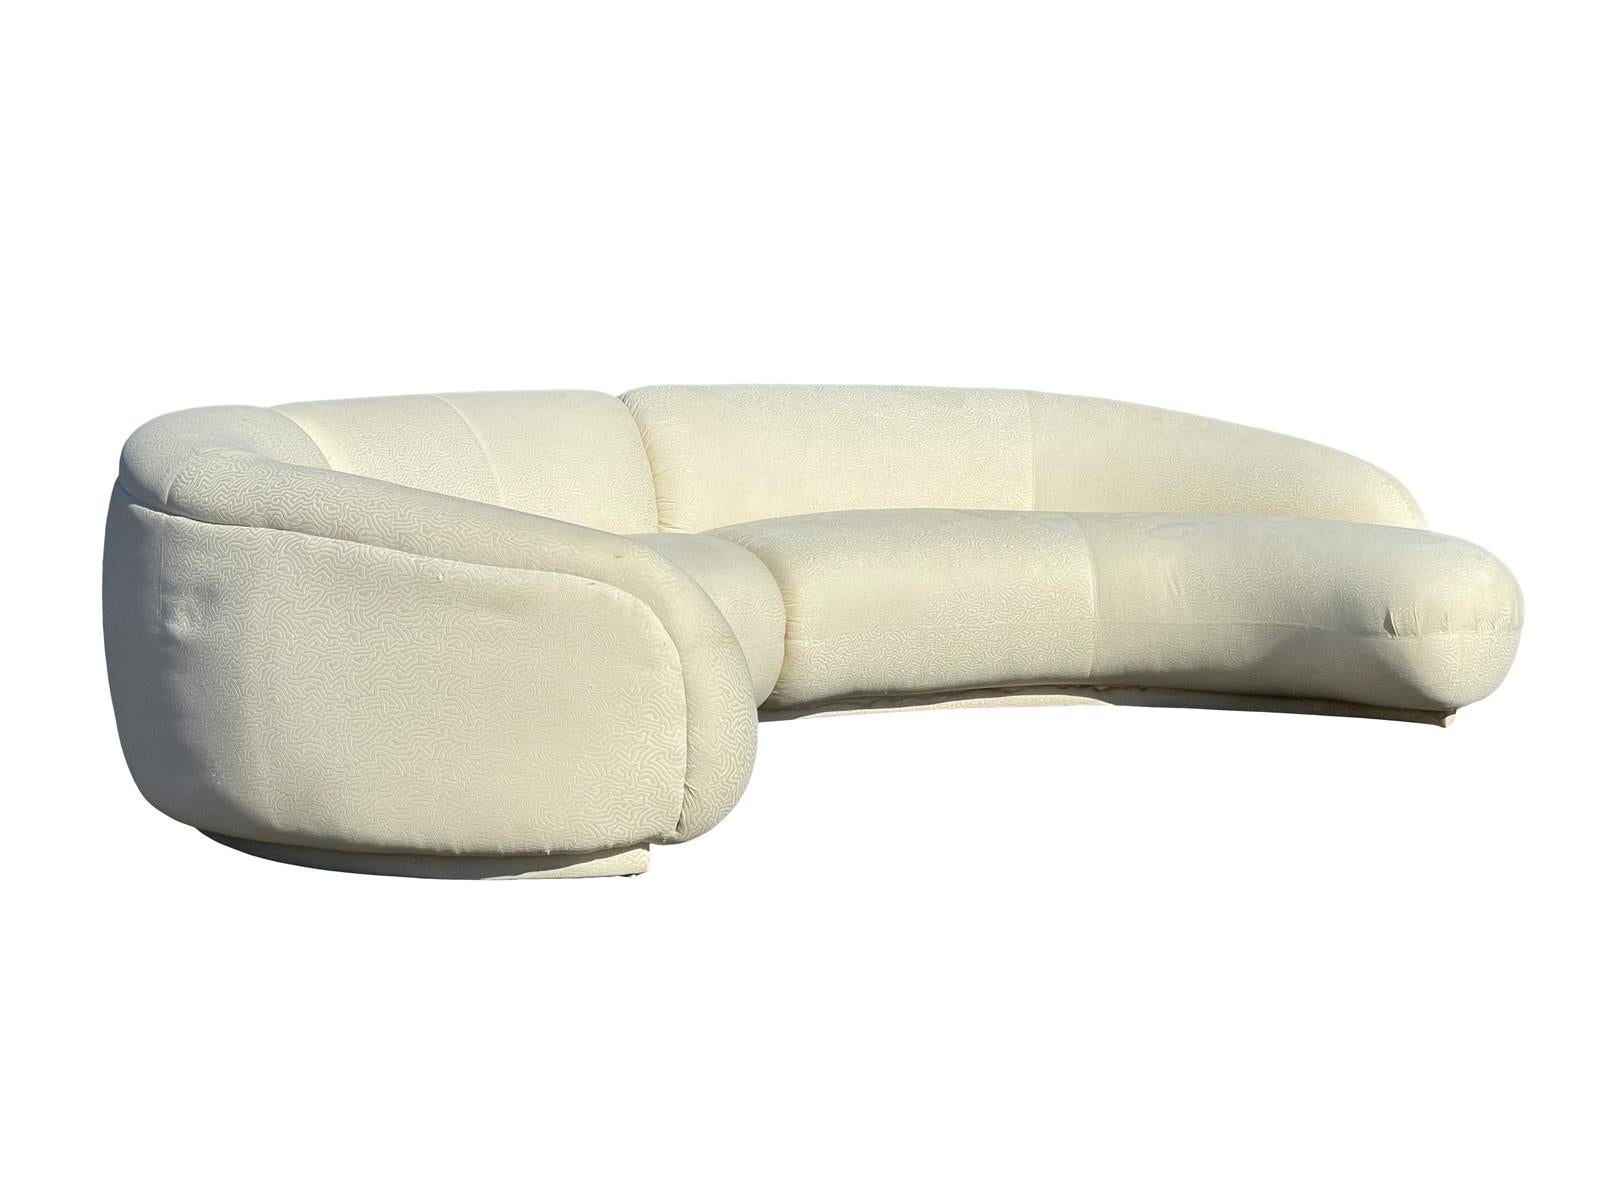 Late 20th Century 1980s 3-Piece Biomorphic Curved Sofa By Preview  For Sale